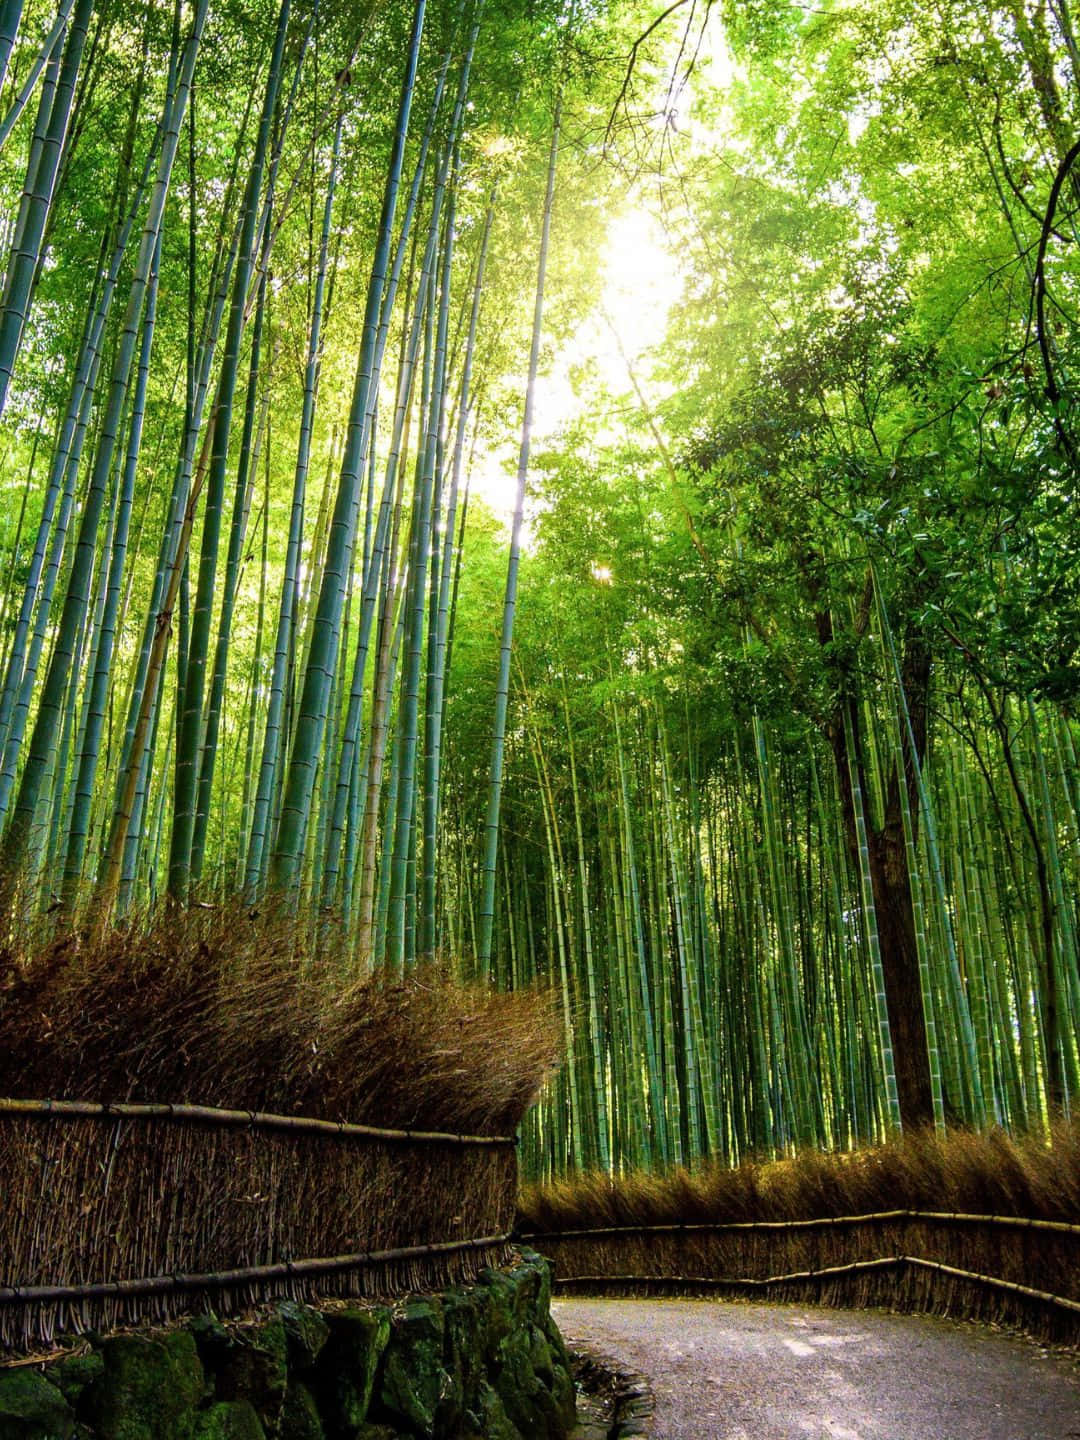 Download wallpaper 2560x1440 green forest bamboo trees dual wide 169  2560x1440 hd background 5712